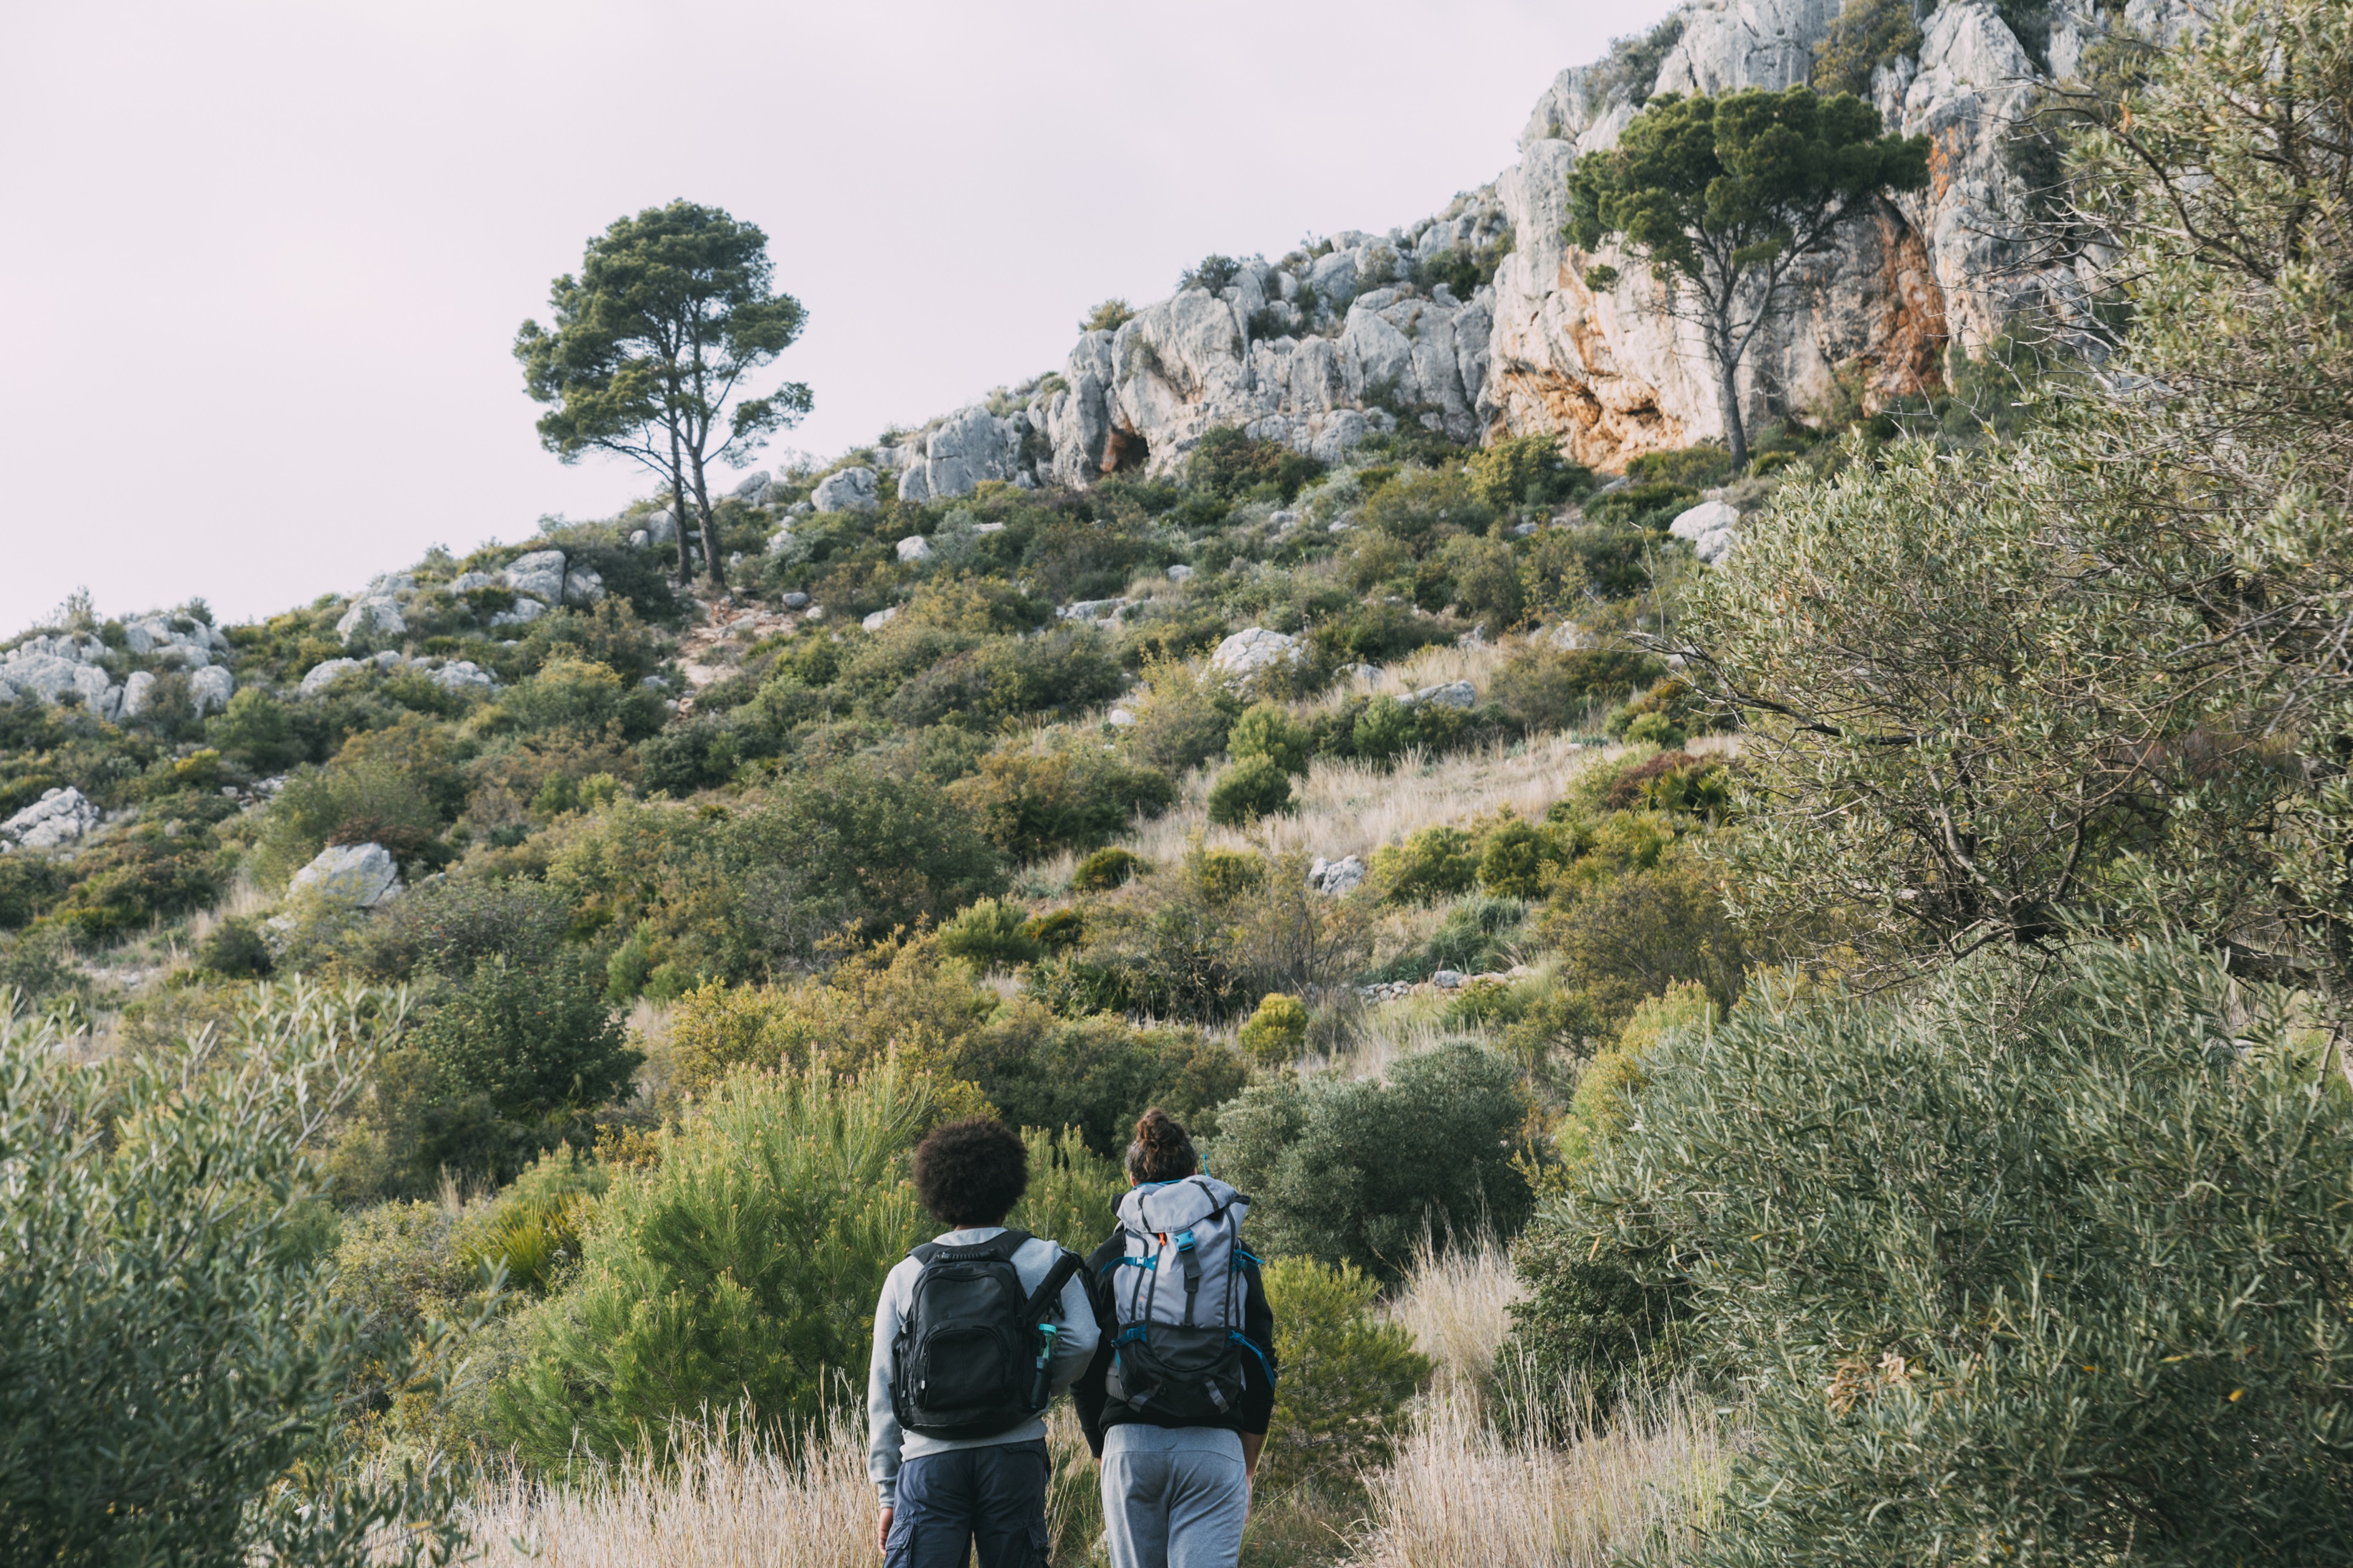 Hiking on Ibiza: The 5 most beautiful routes for a discovery tour on the island